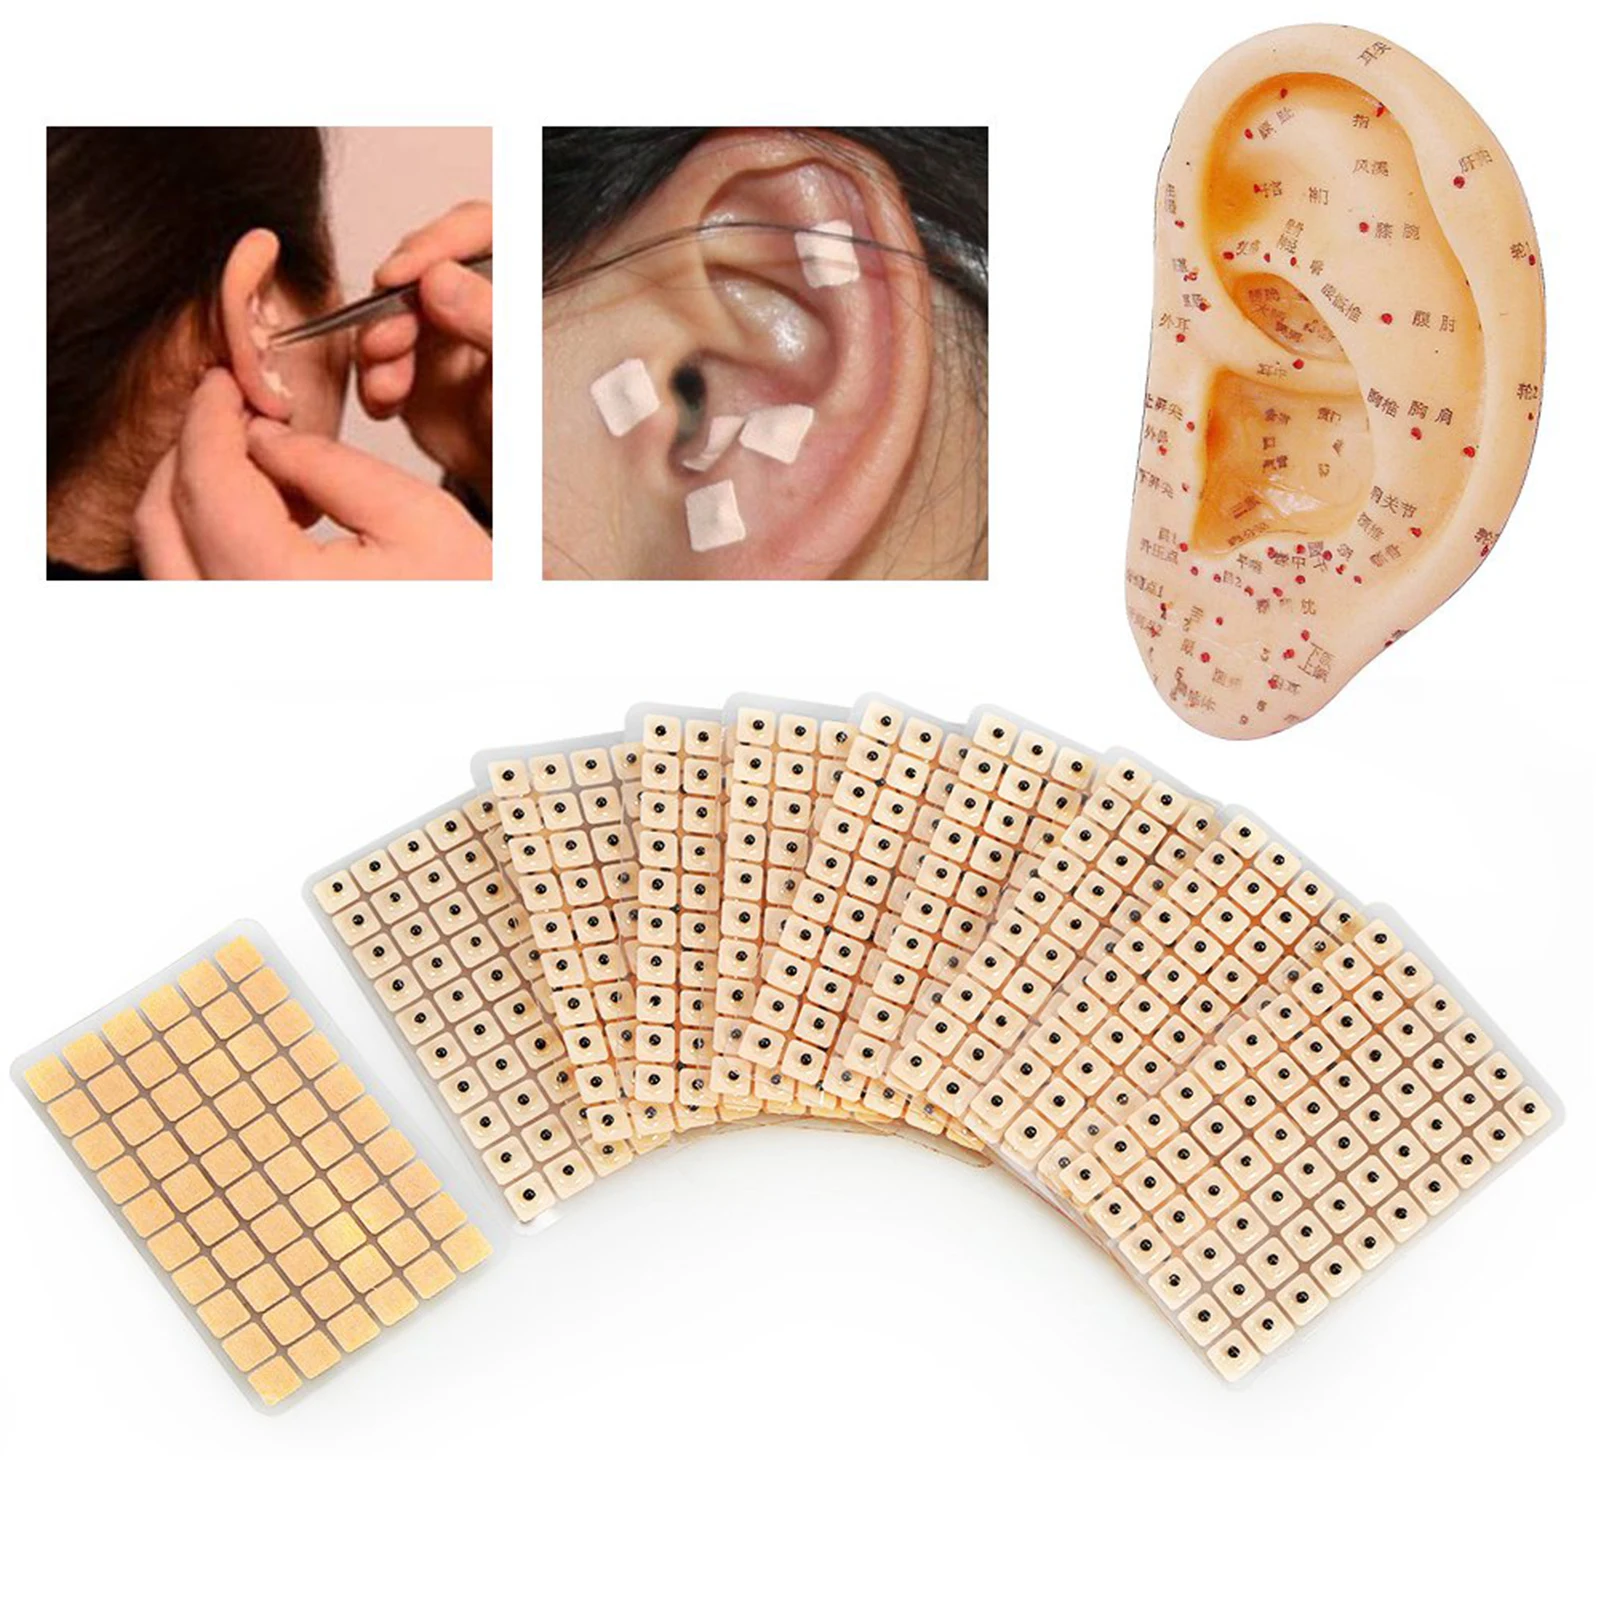 

600Pcs/set Ear Acupuncture Massage Sticker Ear Point Massage Press Therapy Needle Seeds Patch Auricular Auriculotherapy Vaccaria